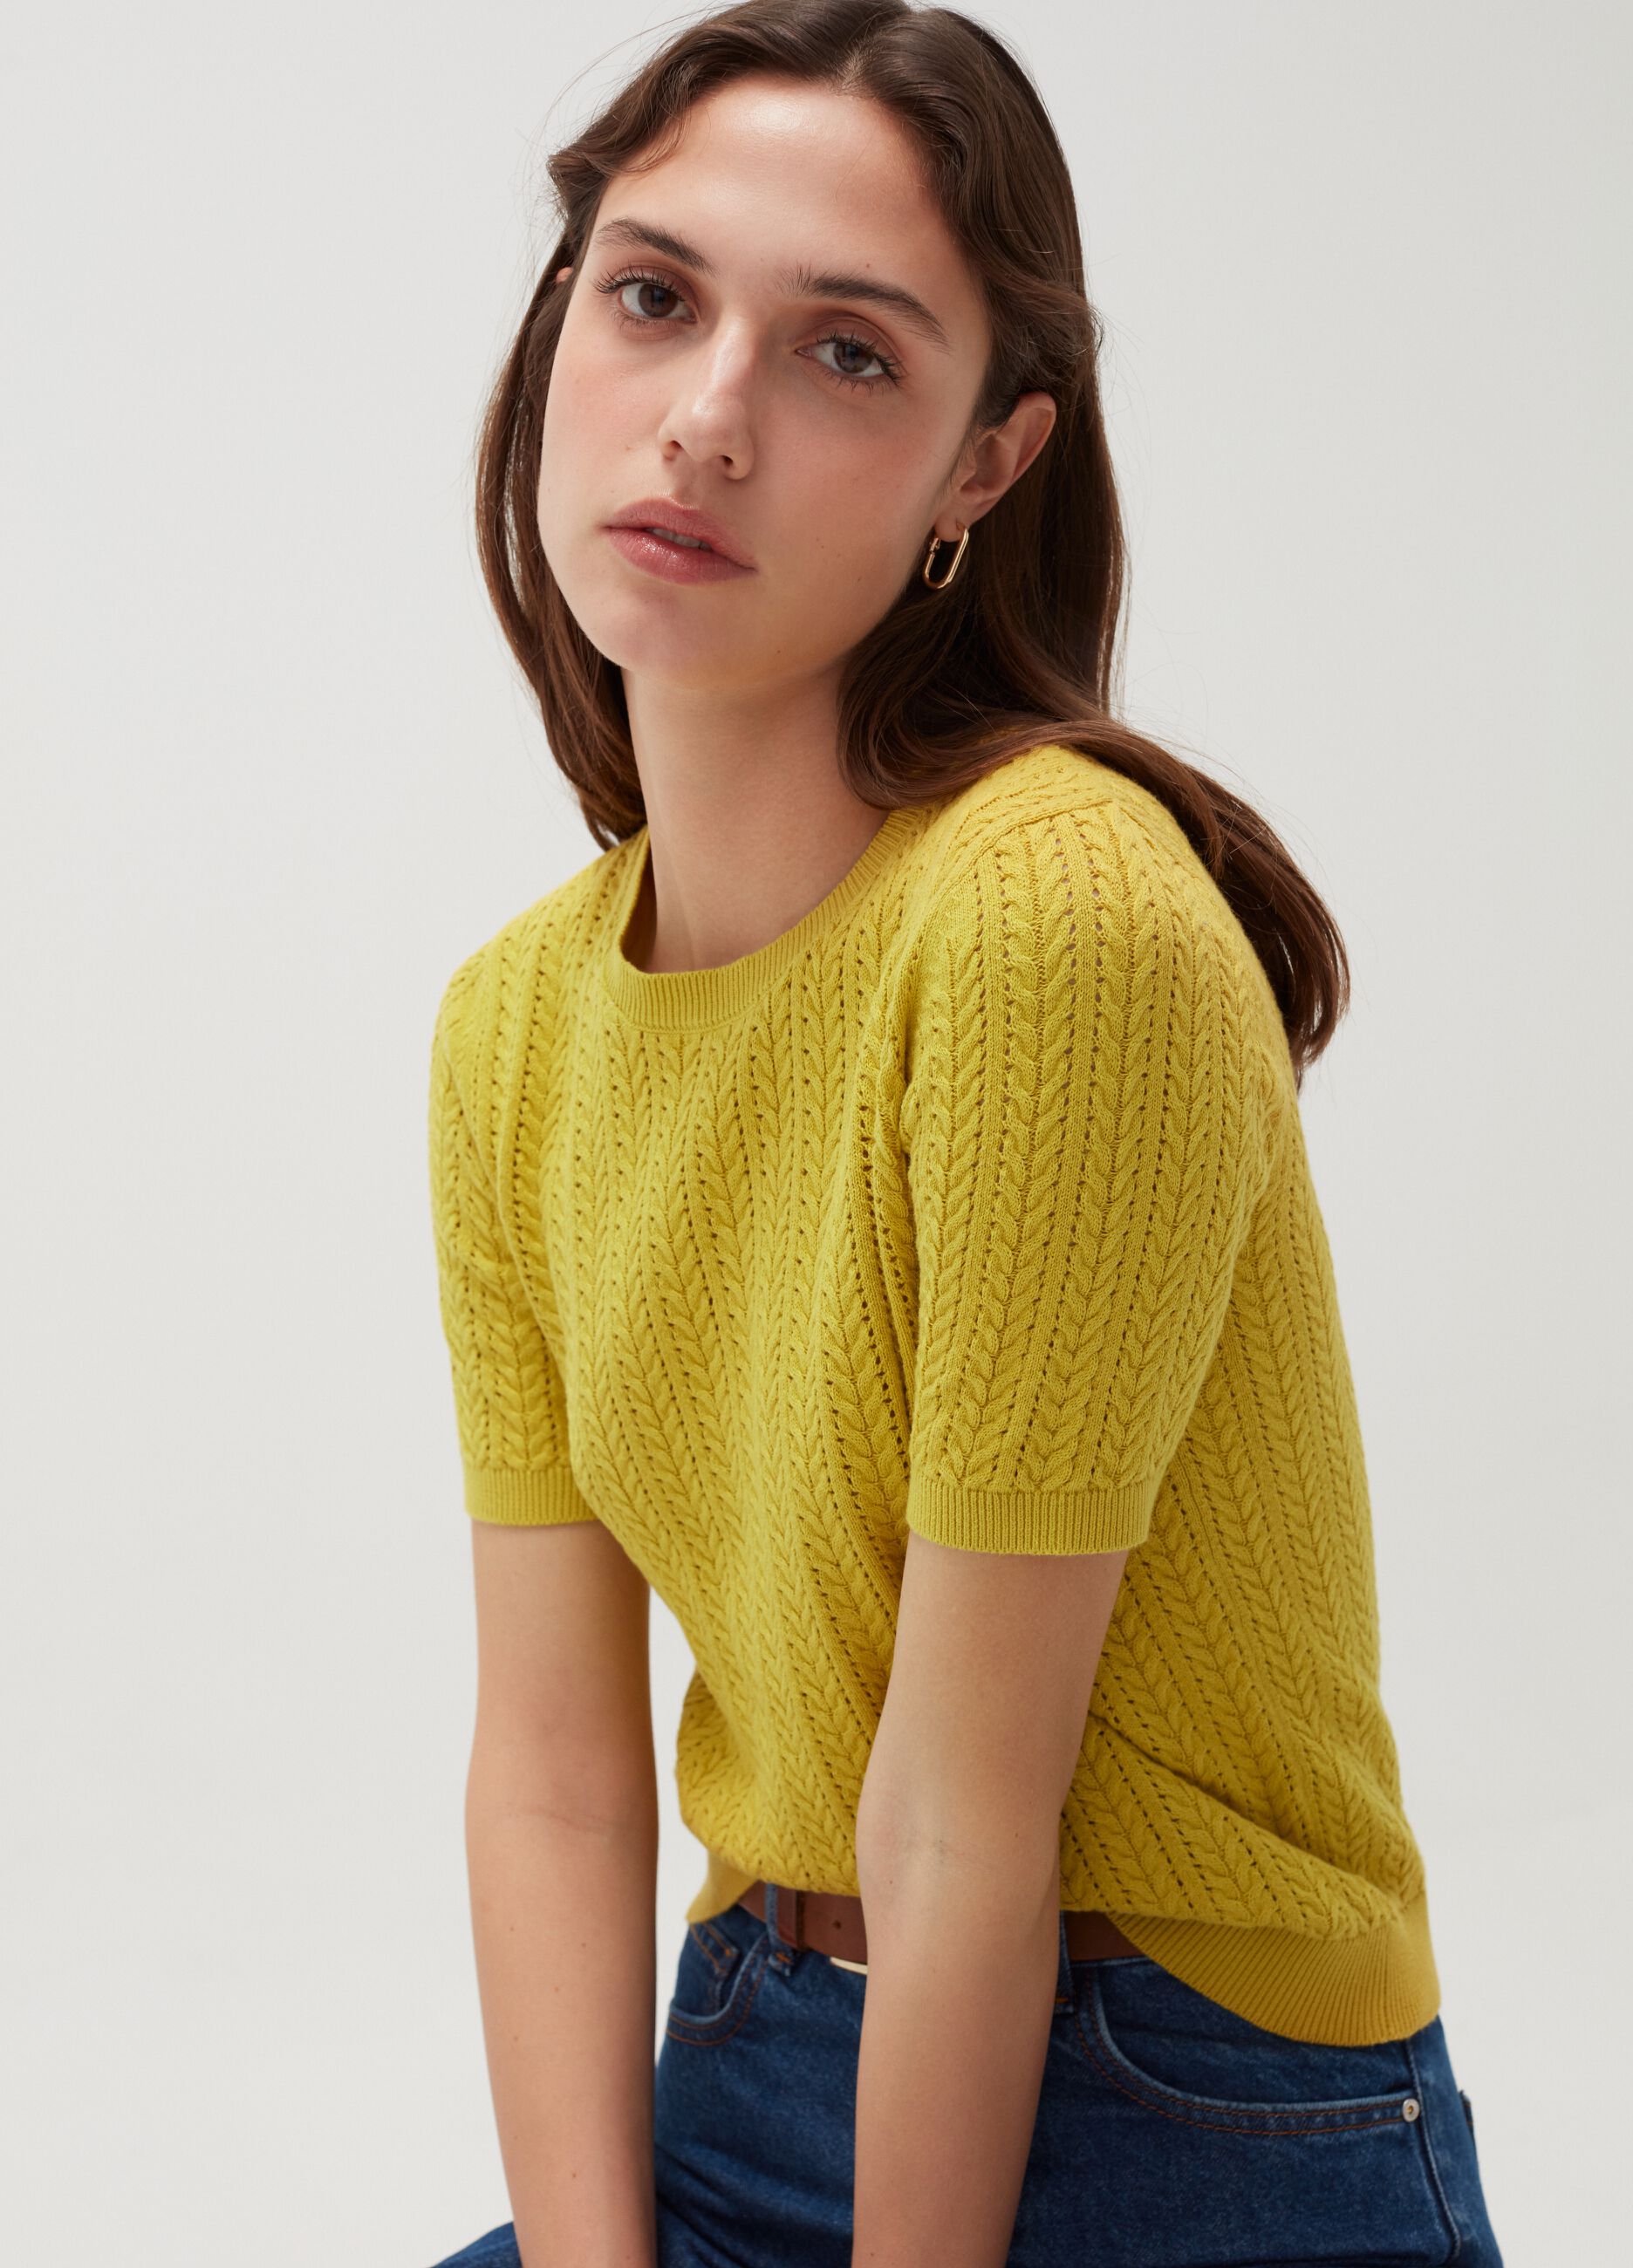 Pullover with short sleeves and braided motif